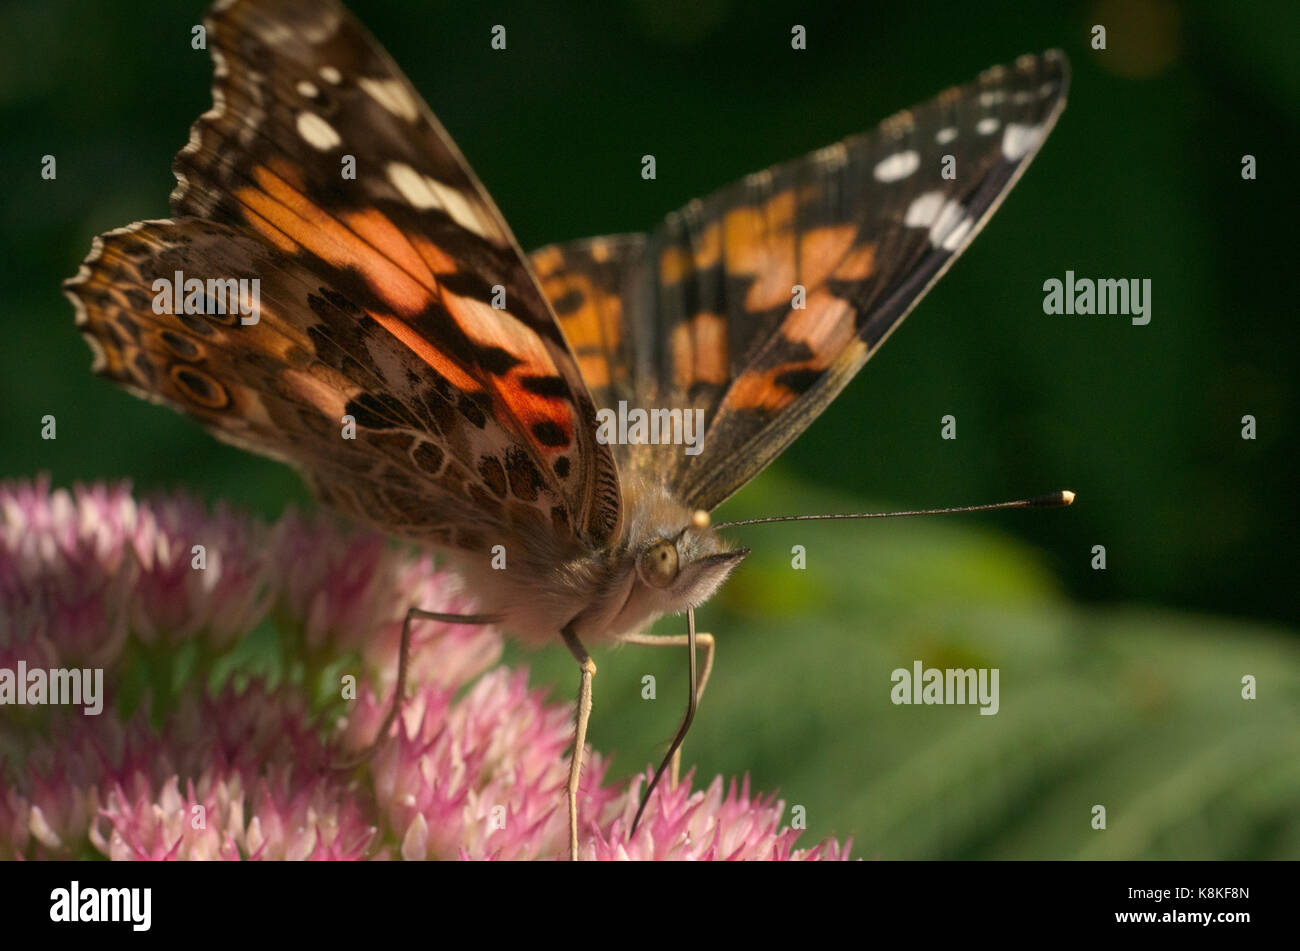 American Painted Beauty Butterfly Nectaring Sedum Flowers Stock Photo ...